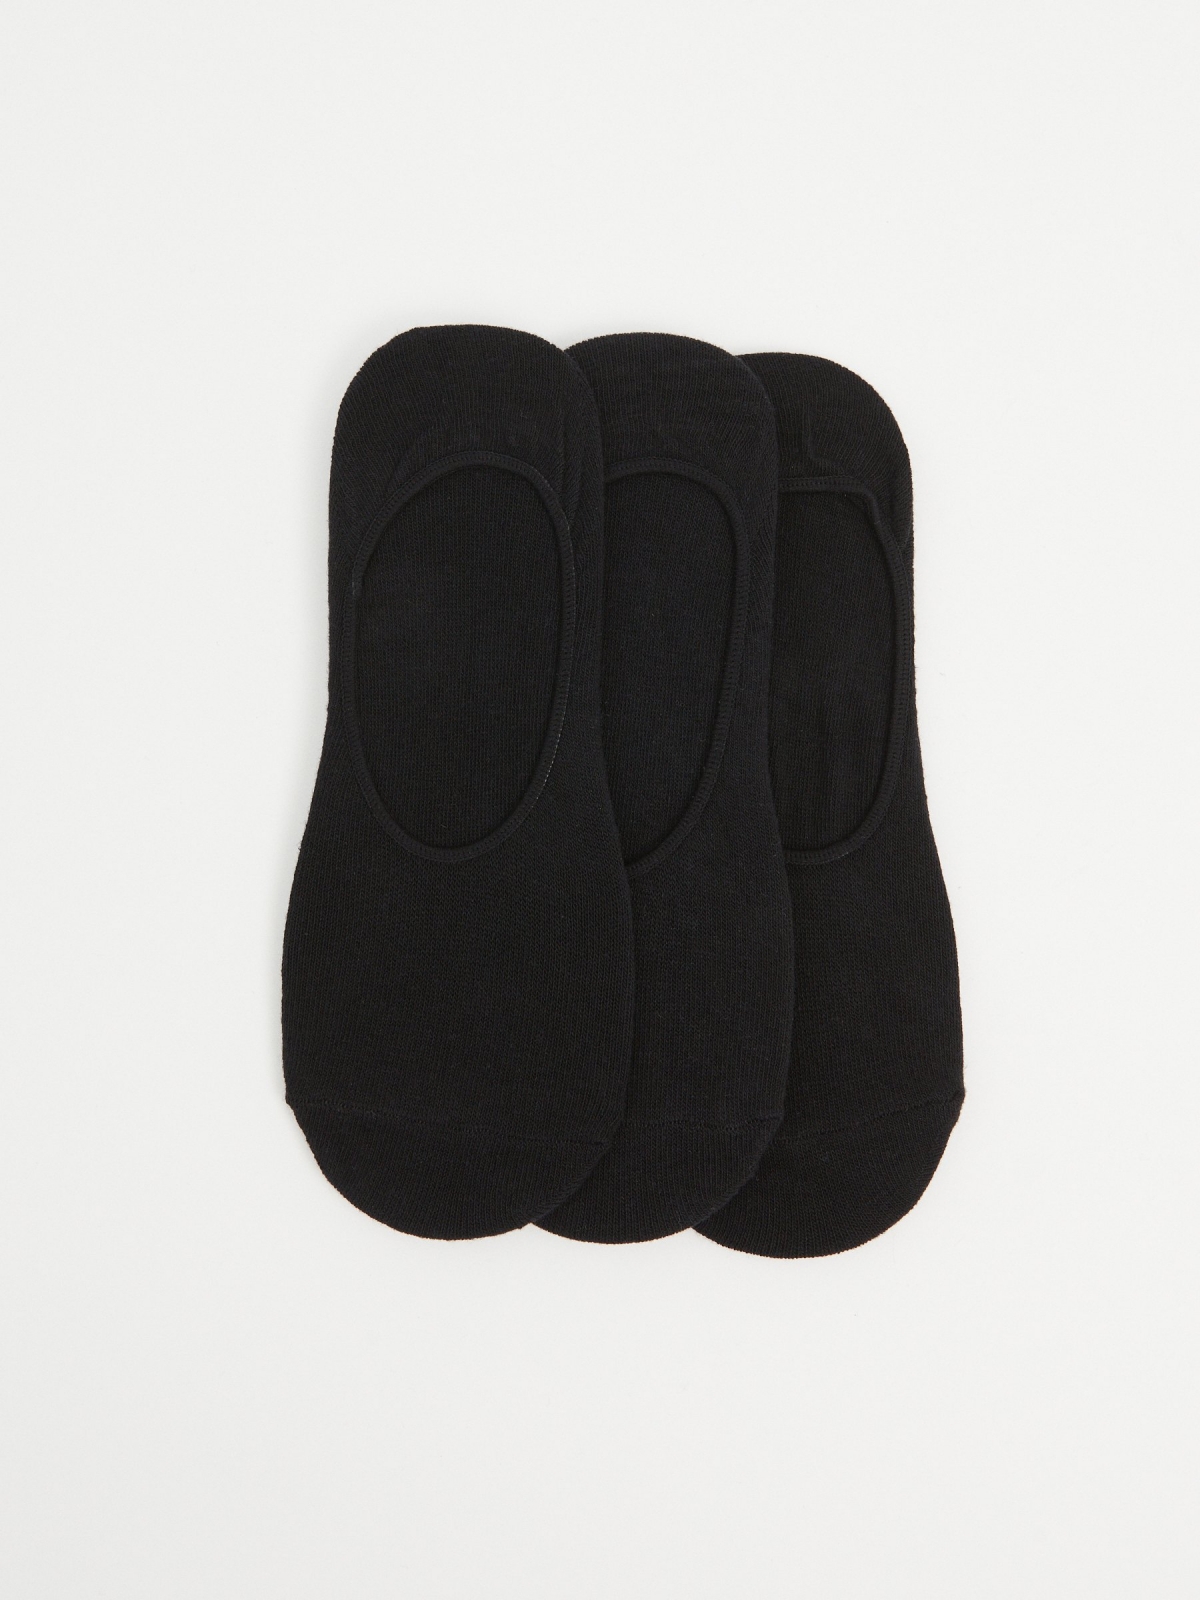 Pack of 3 black invisible socks